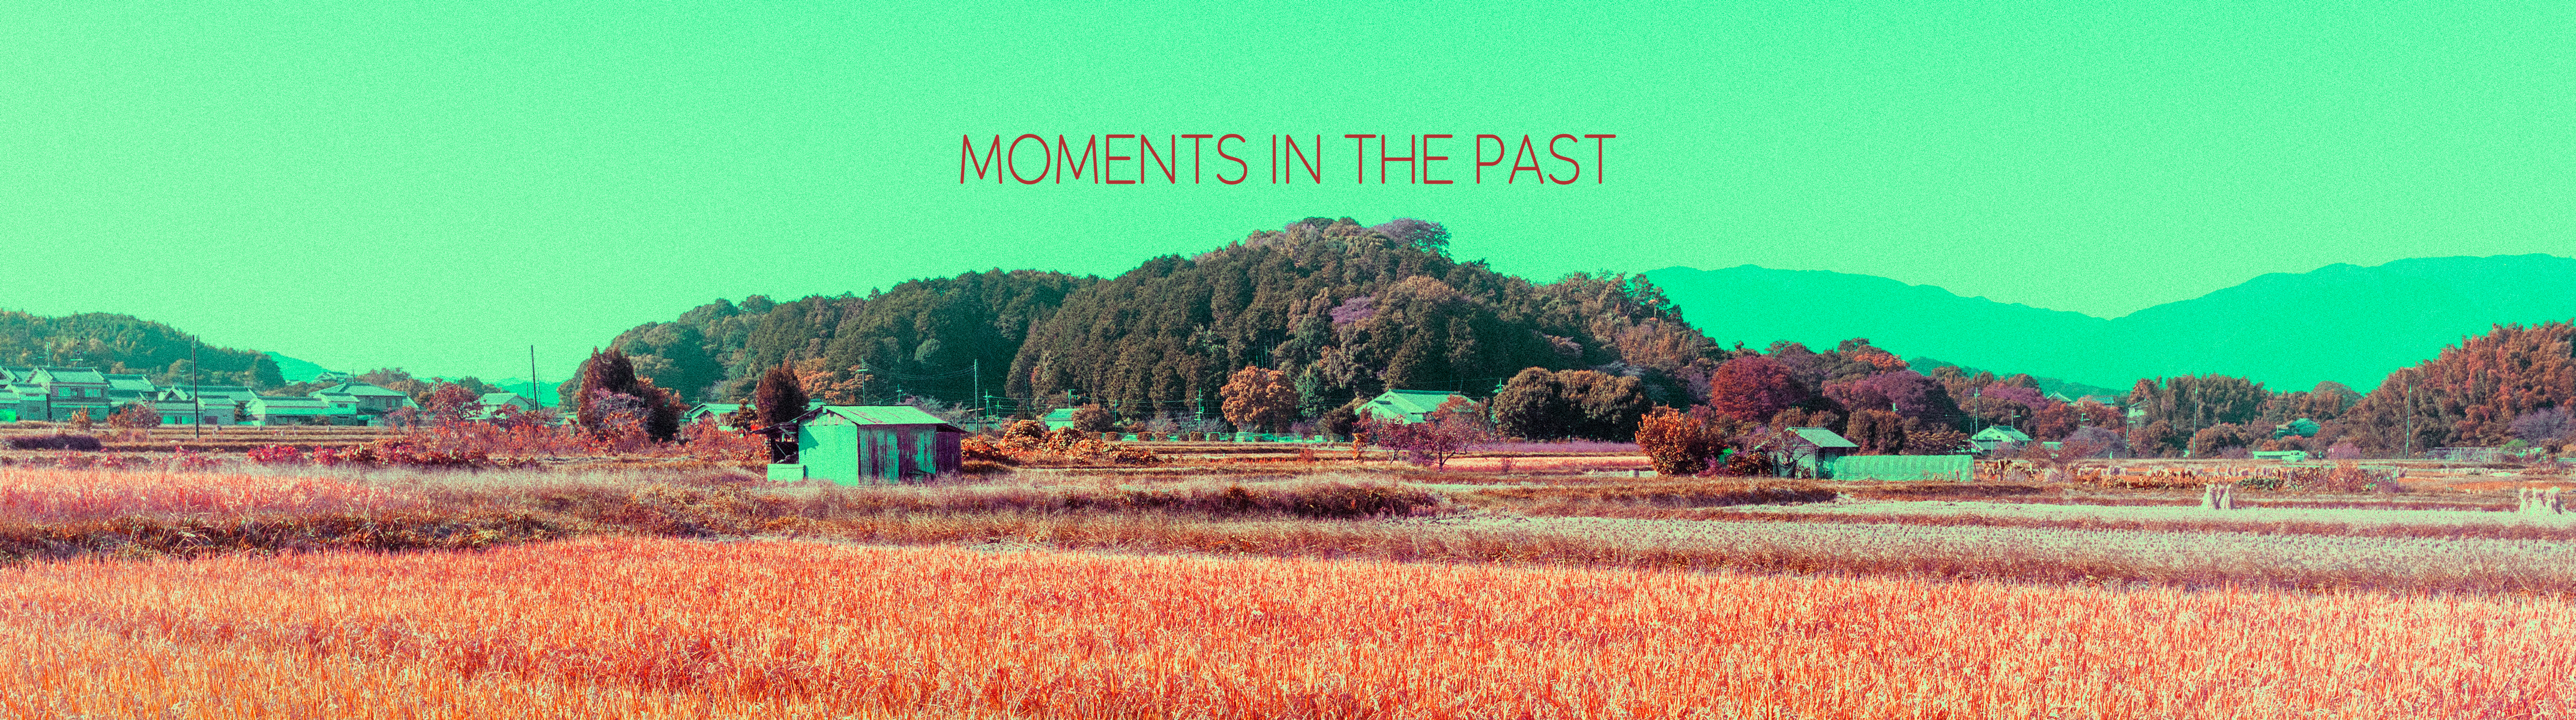 MOMENTS IN THE PAST